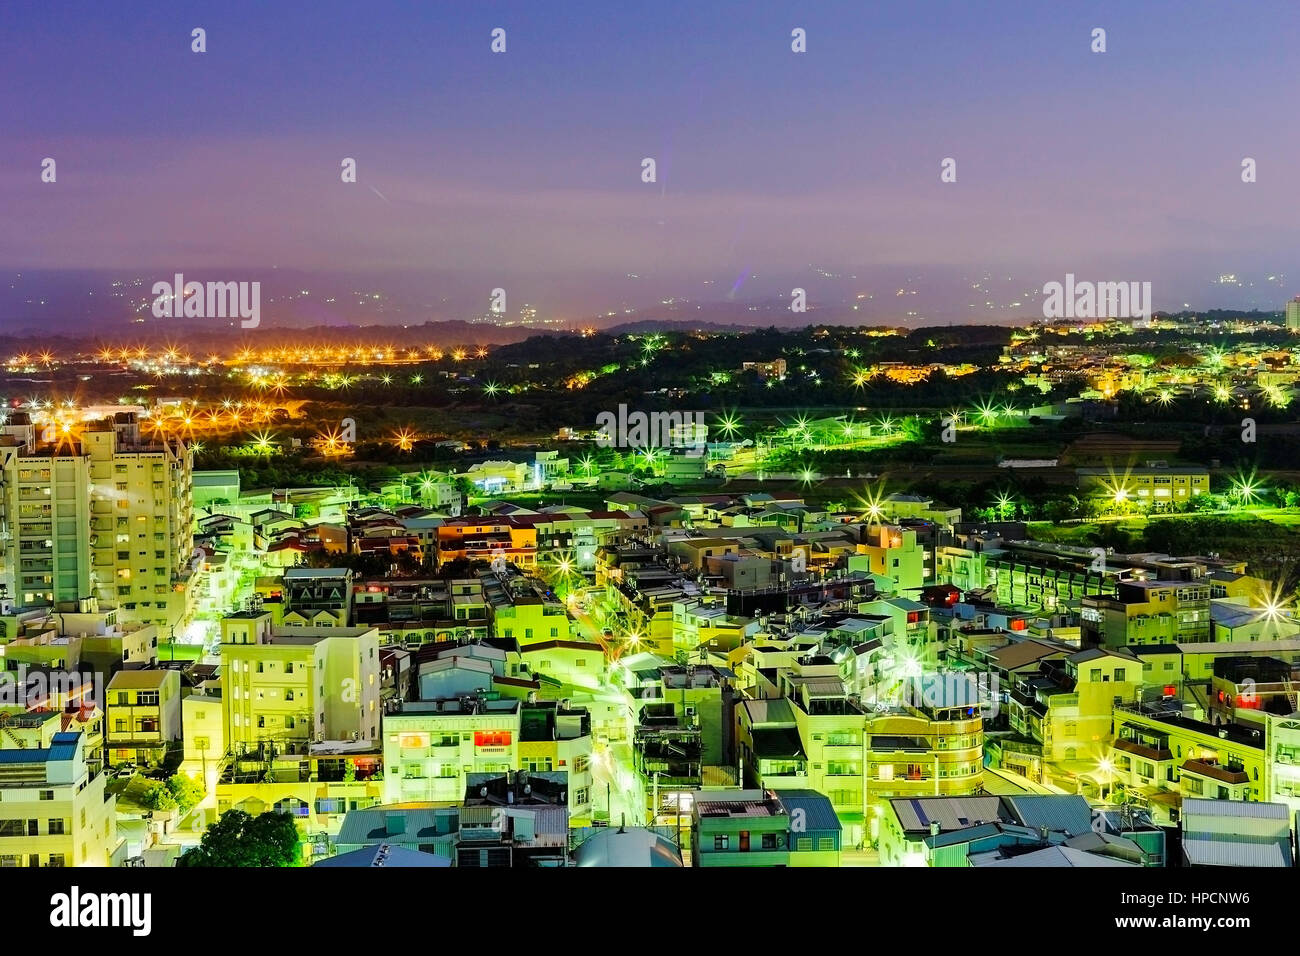 Chiayi city in Taiwan at night time Stock Photo